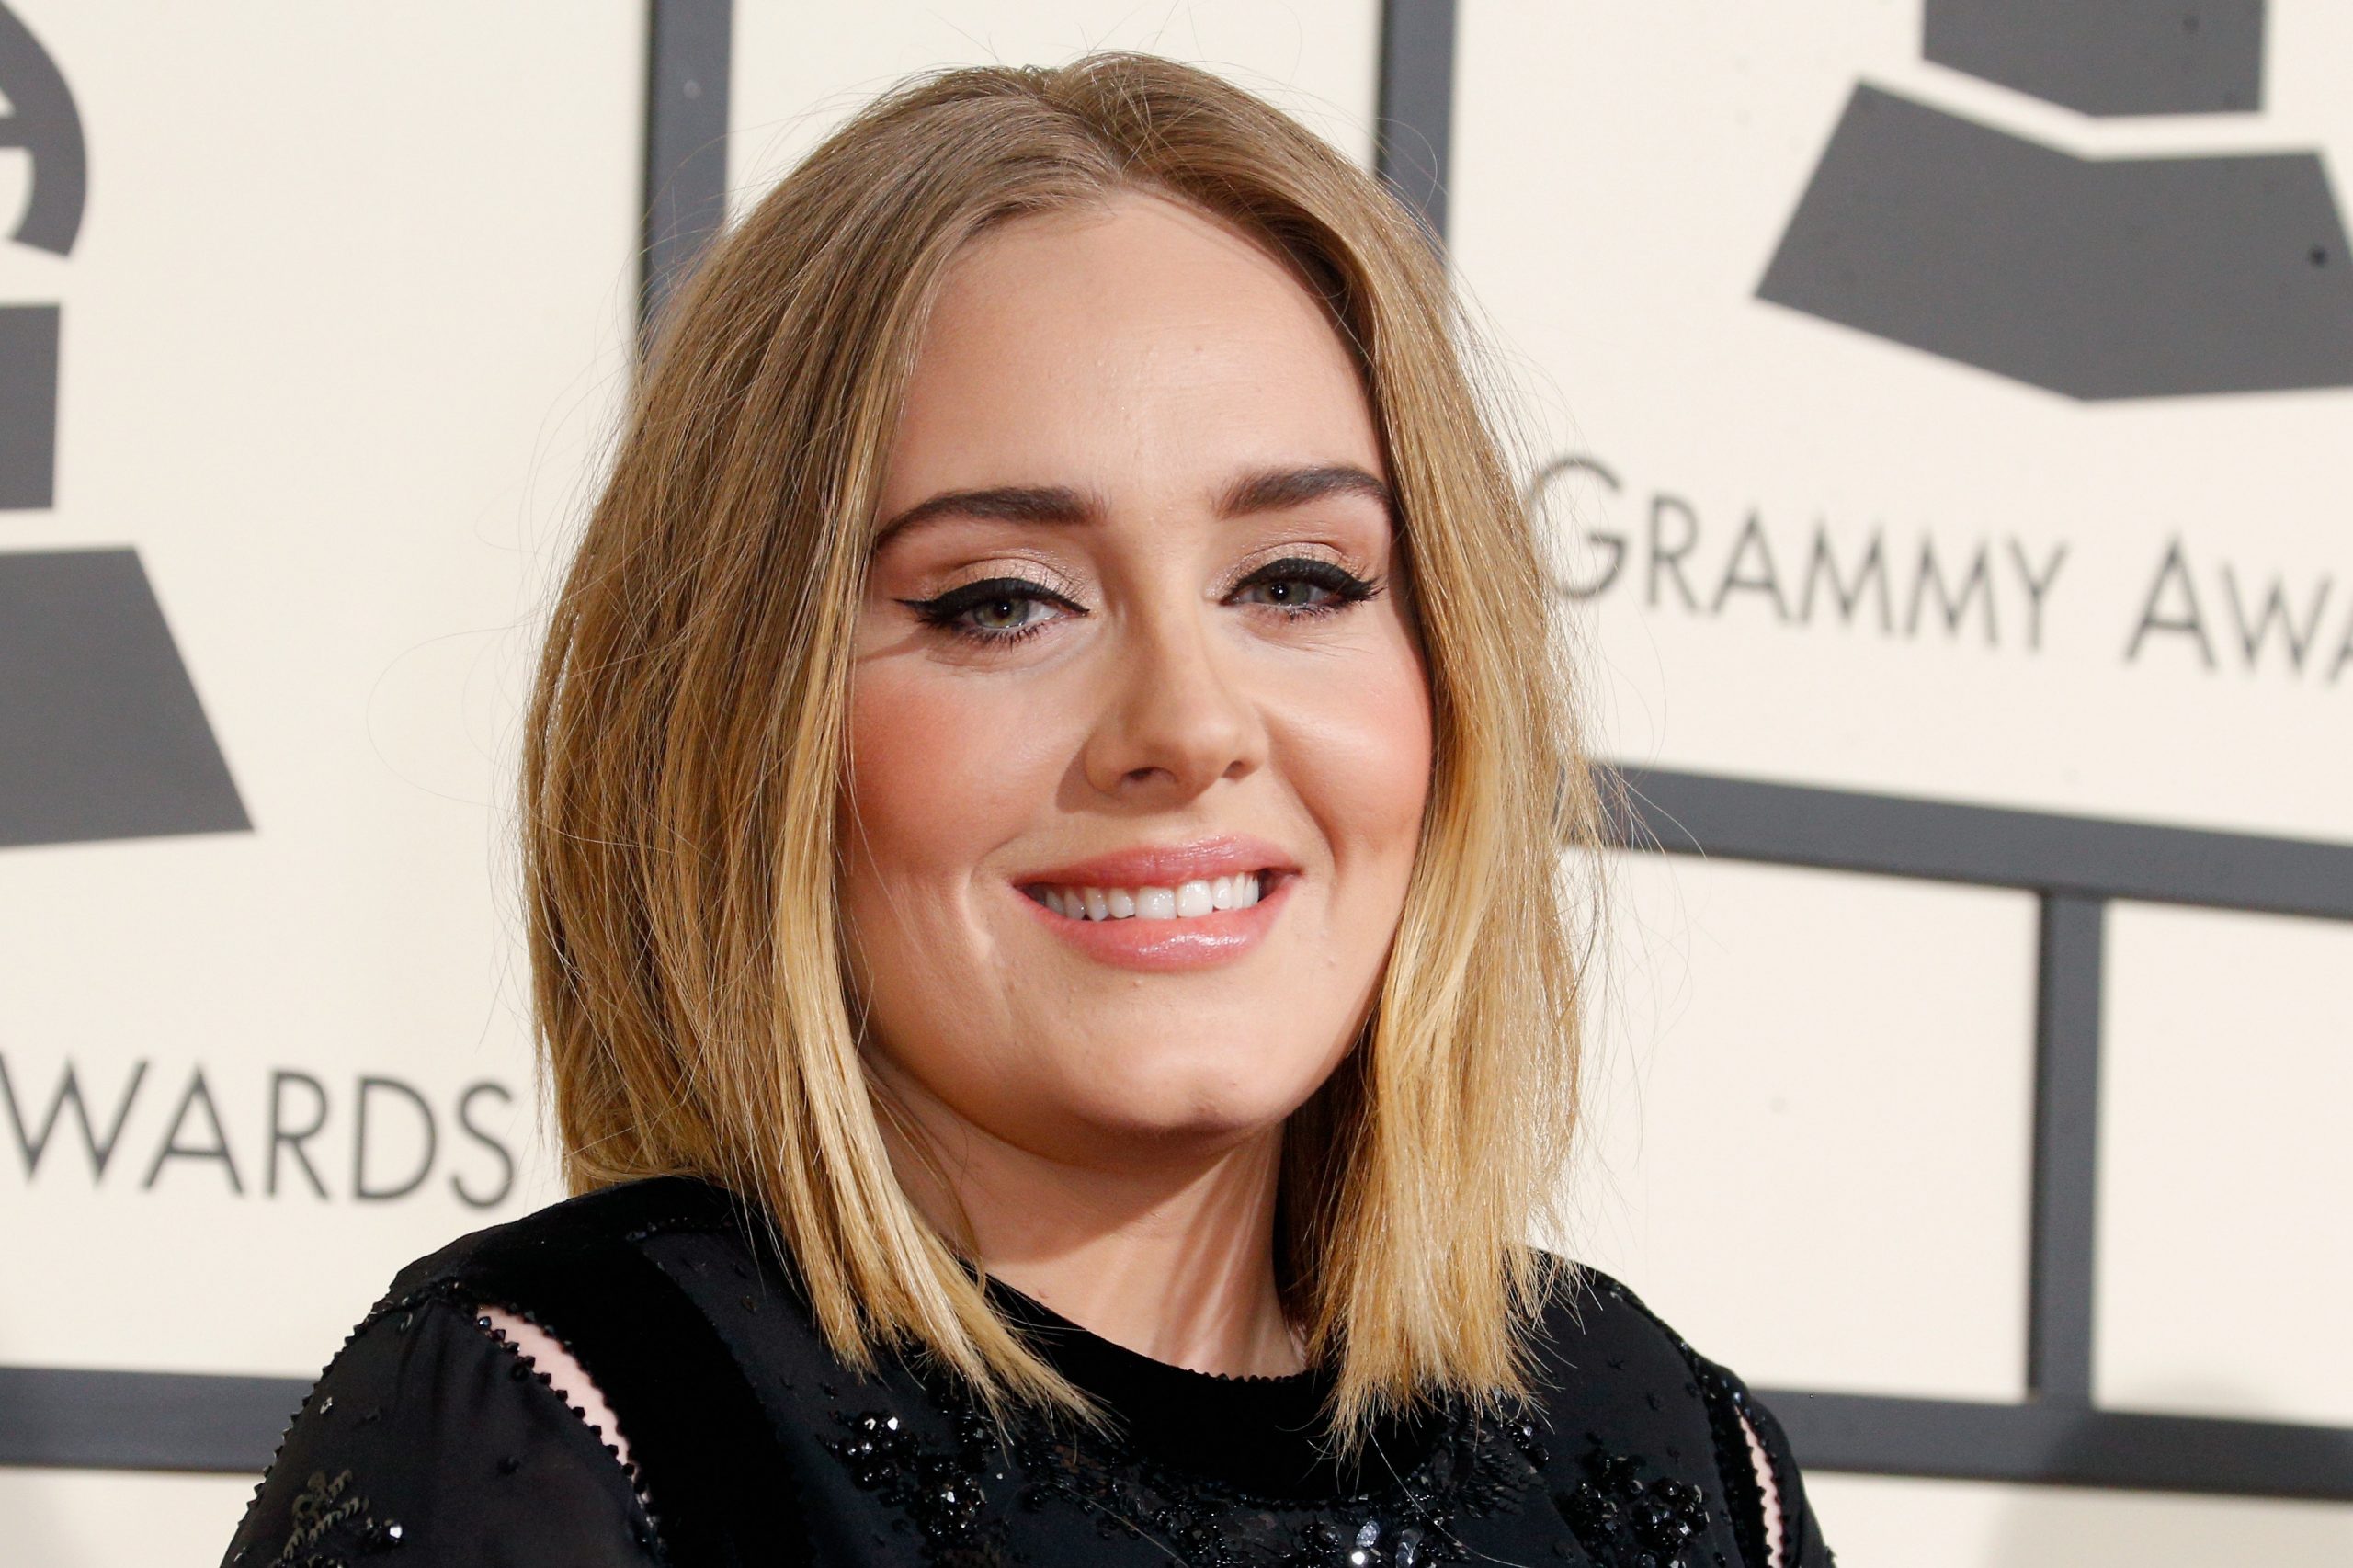 Adele lands 2-hour CBS special and Oprah feature to celebrate new album